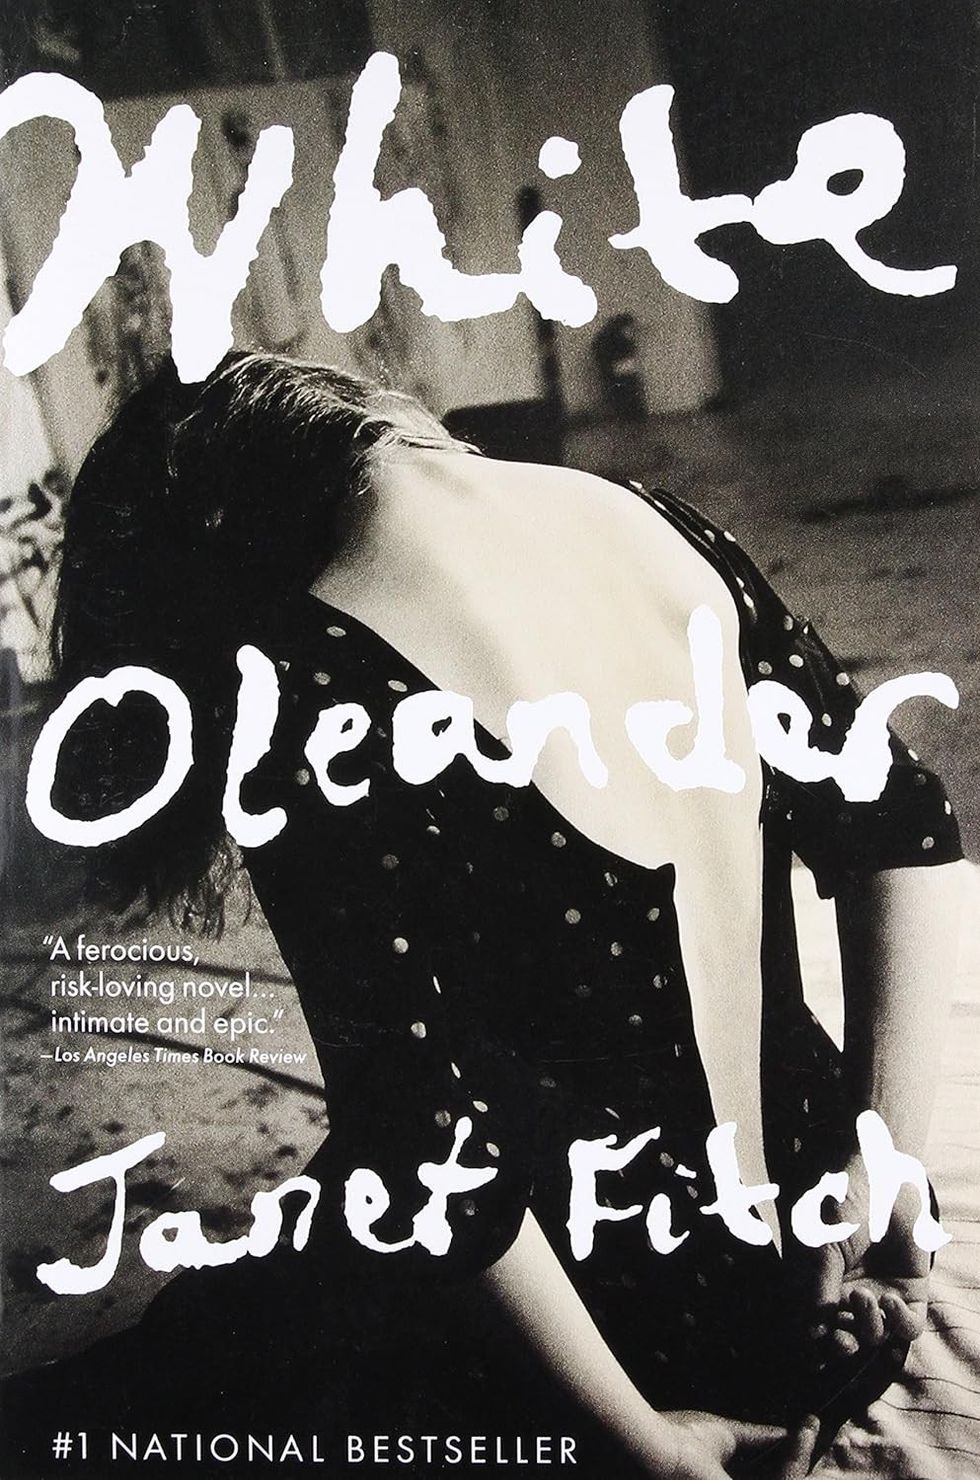 "White Oleander" by Janet Fitch